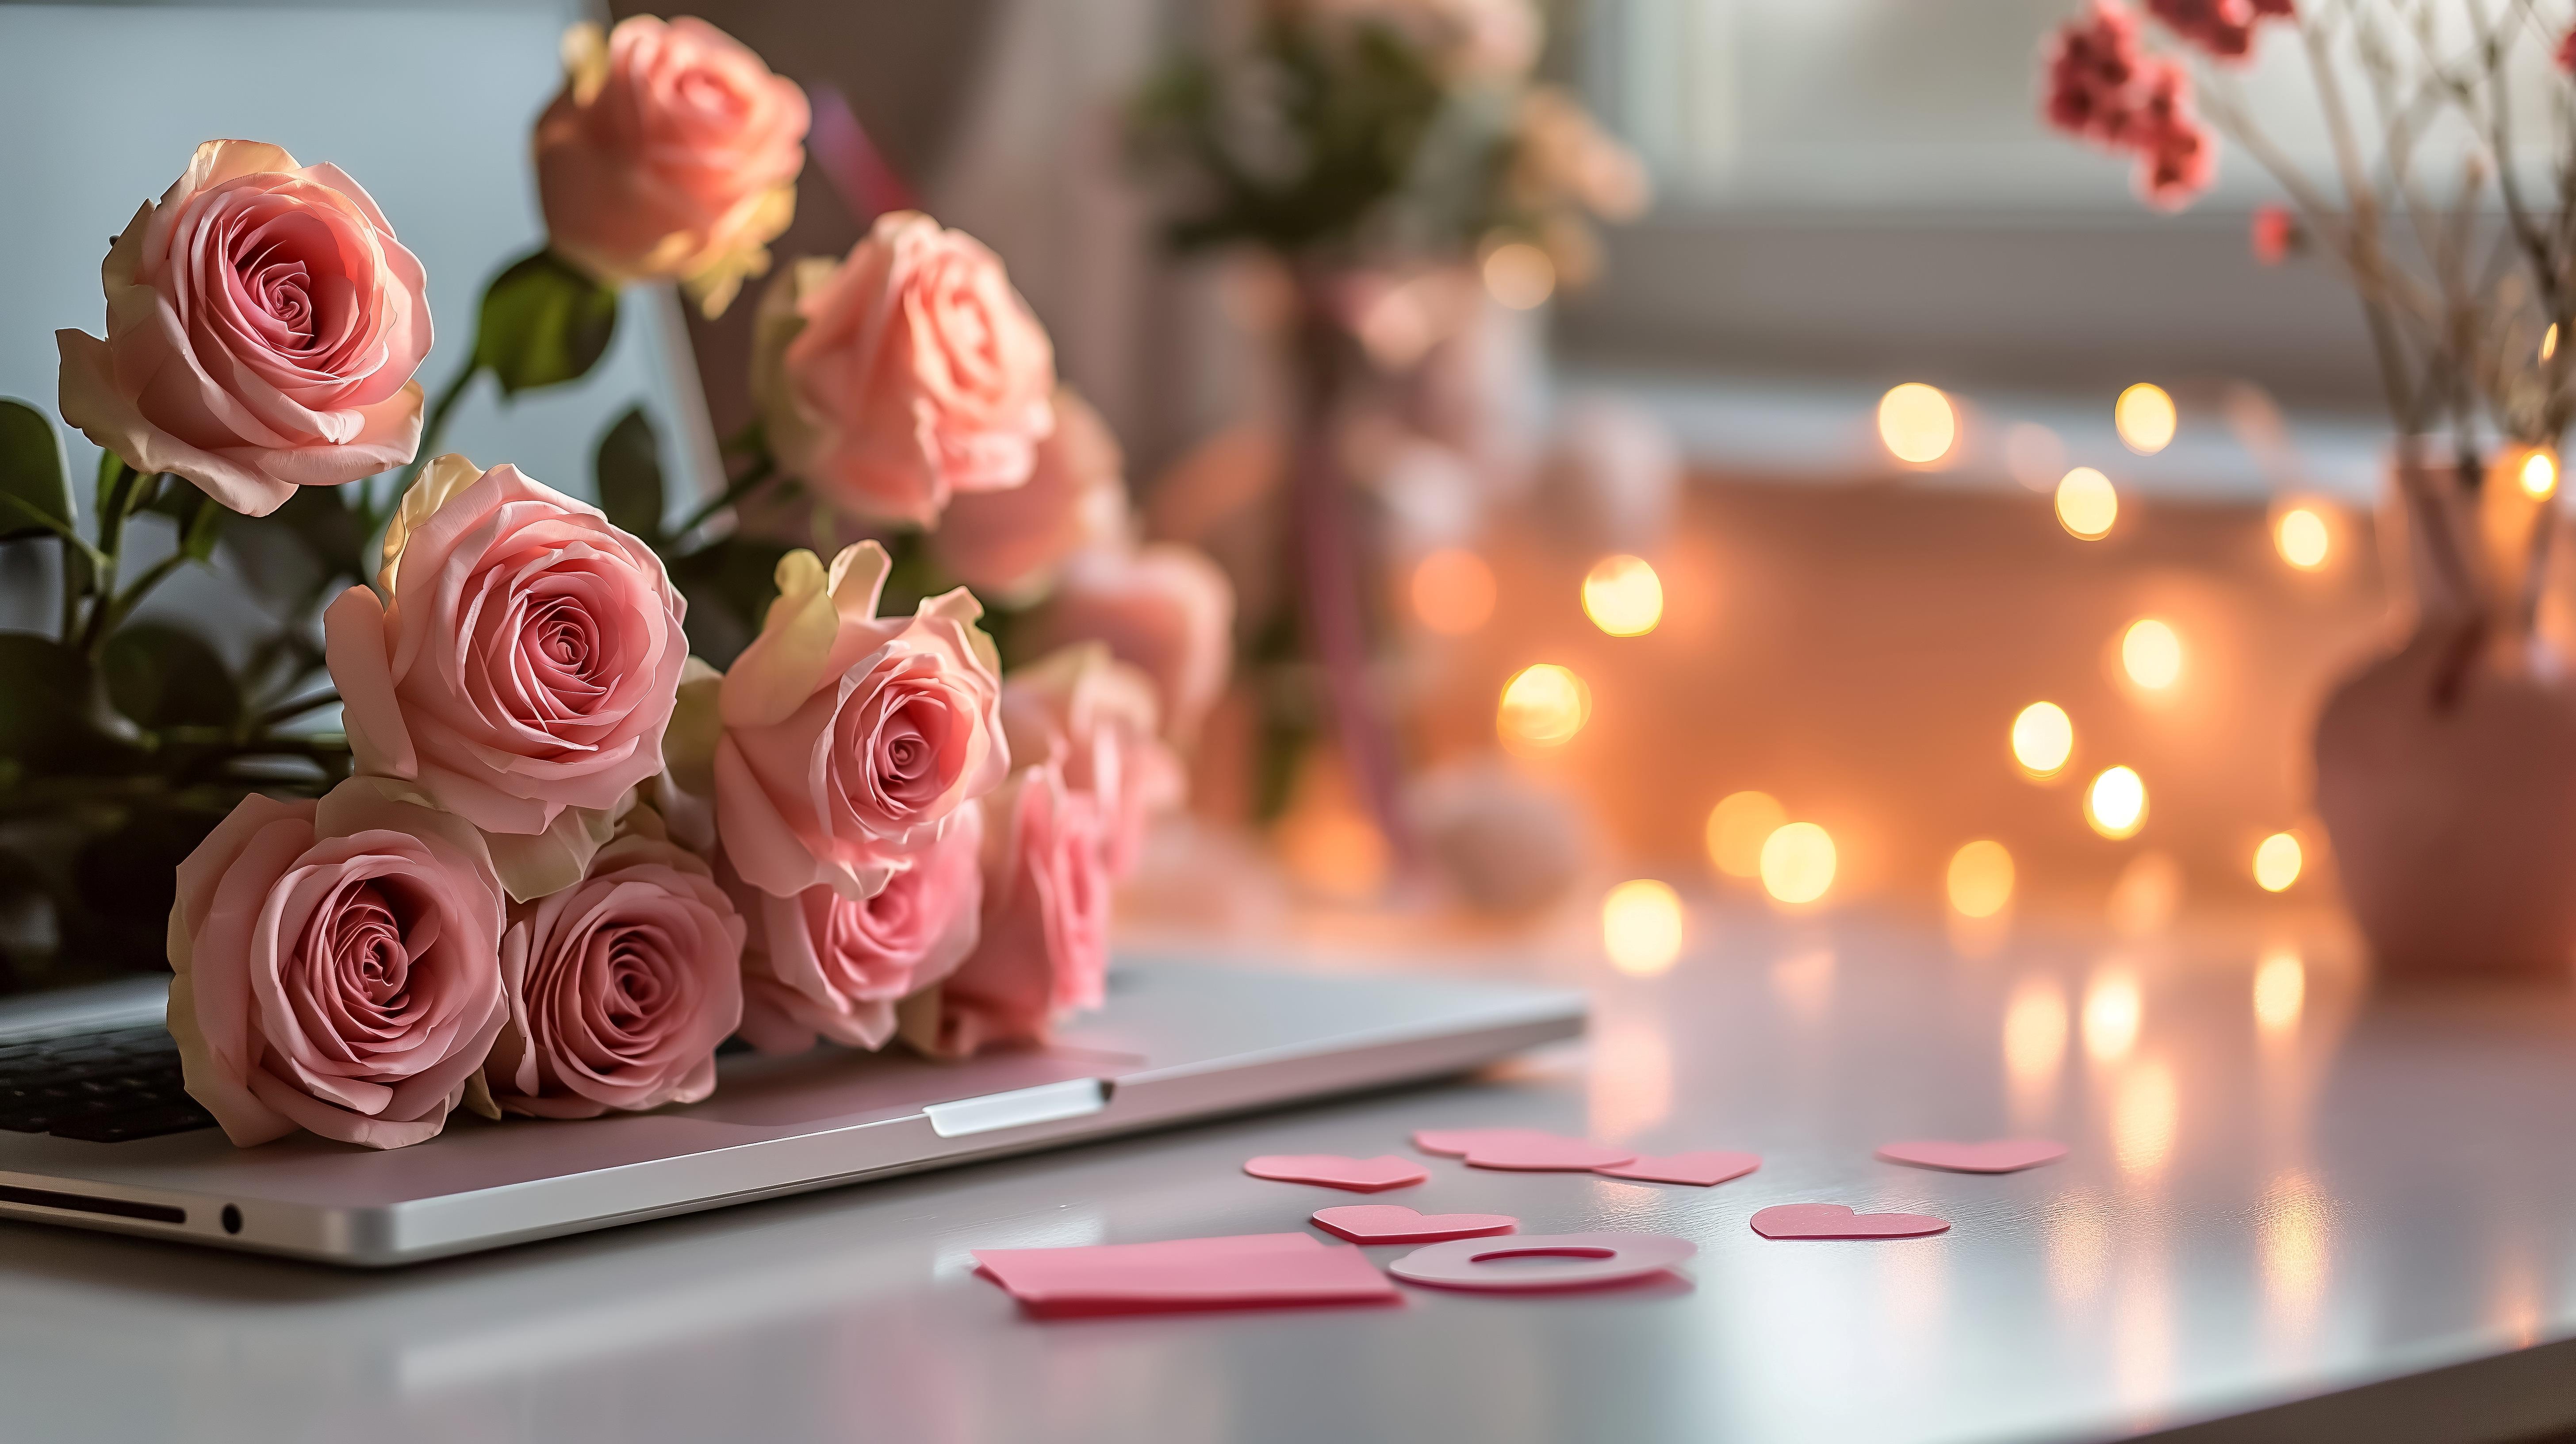 Red roses on a laptop on a desk